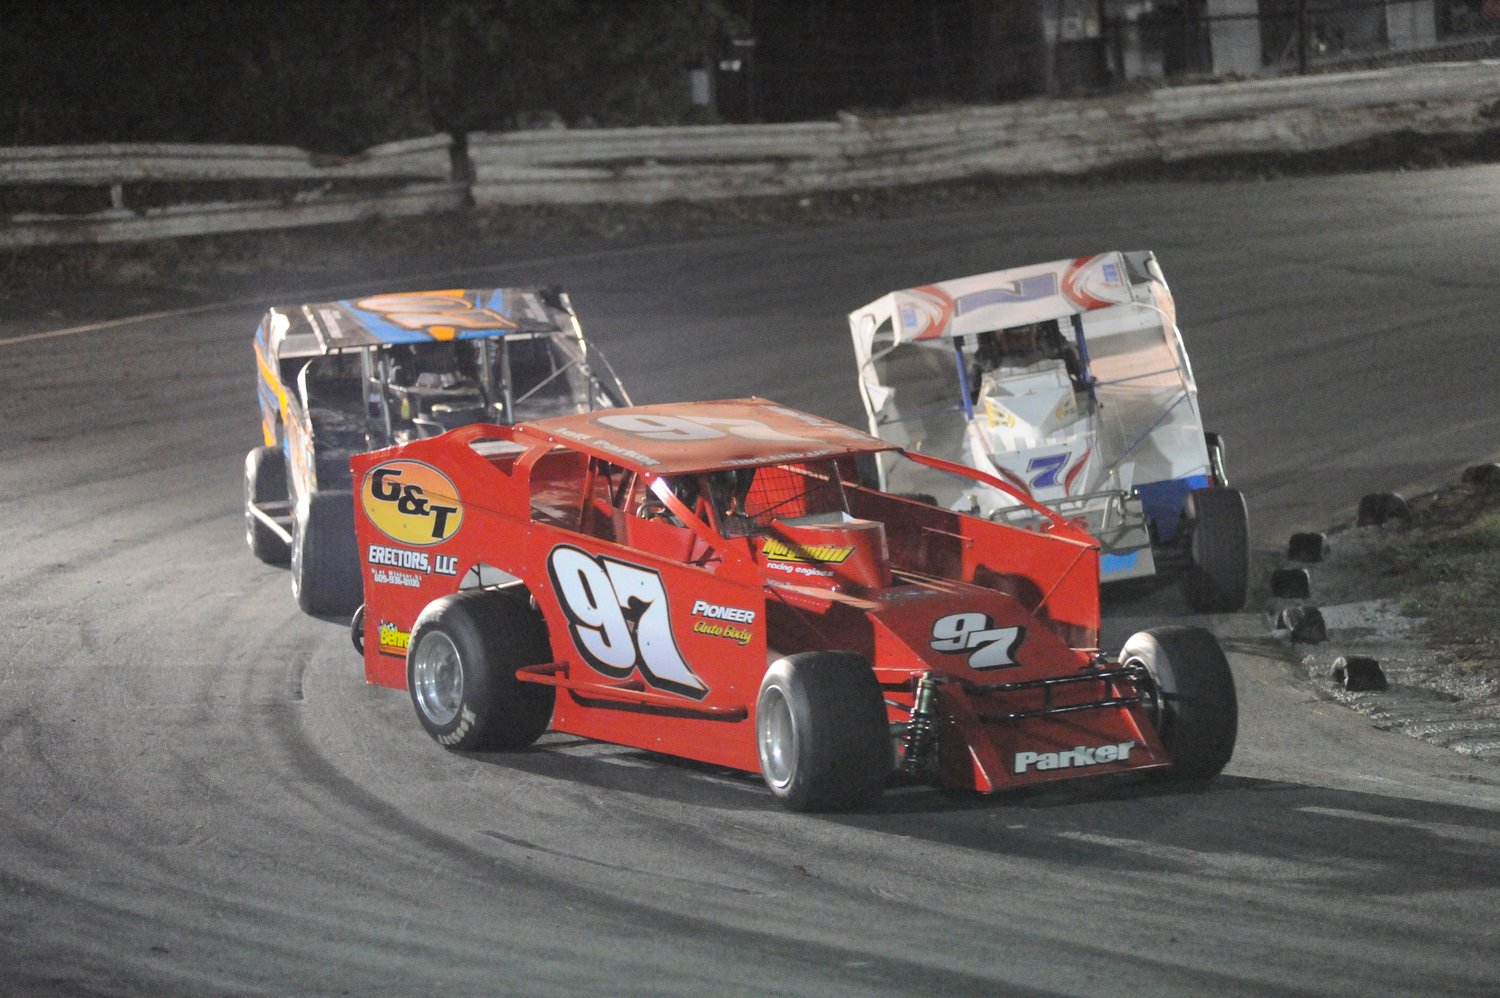 Red zone. Jeff Parker placed second in the DIRT modified feature race, a fraction of a second behind first-place winner Bill Deckelman.